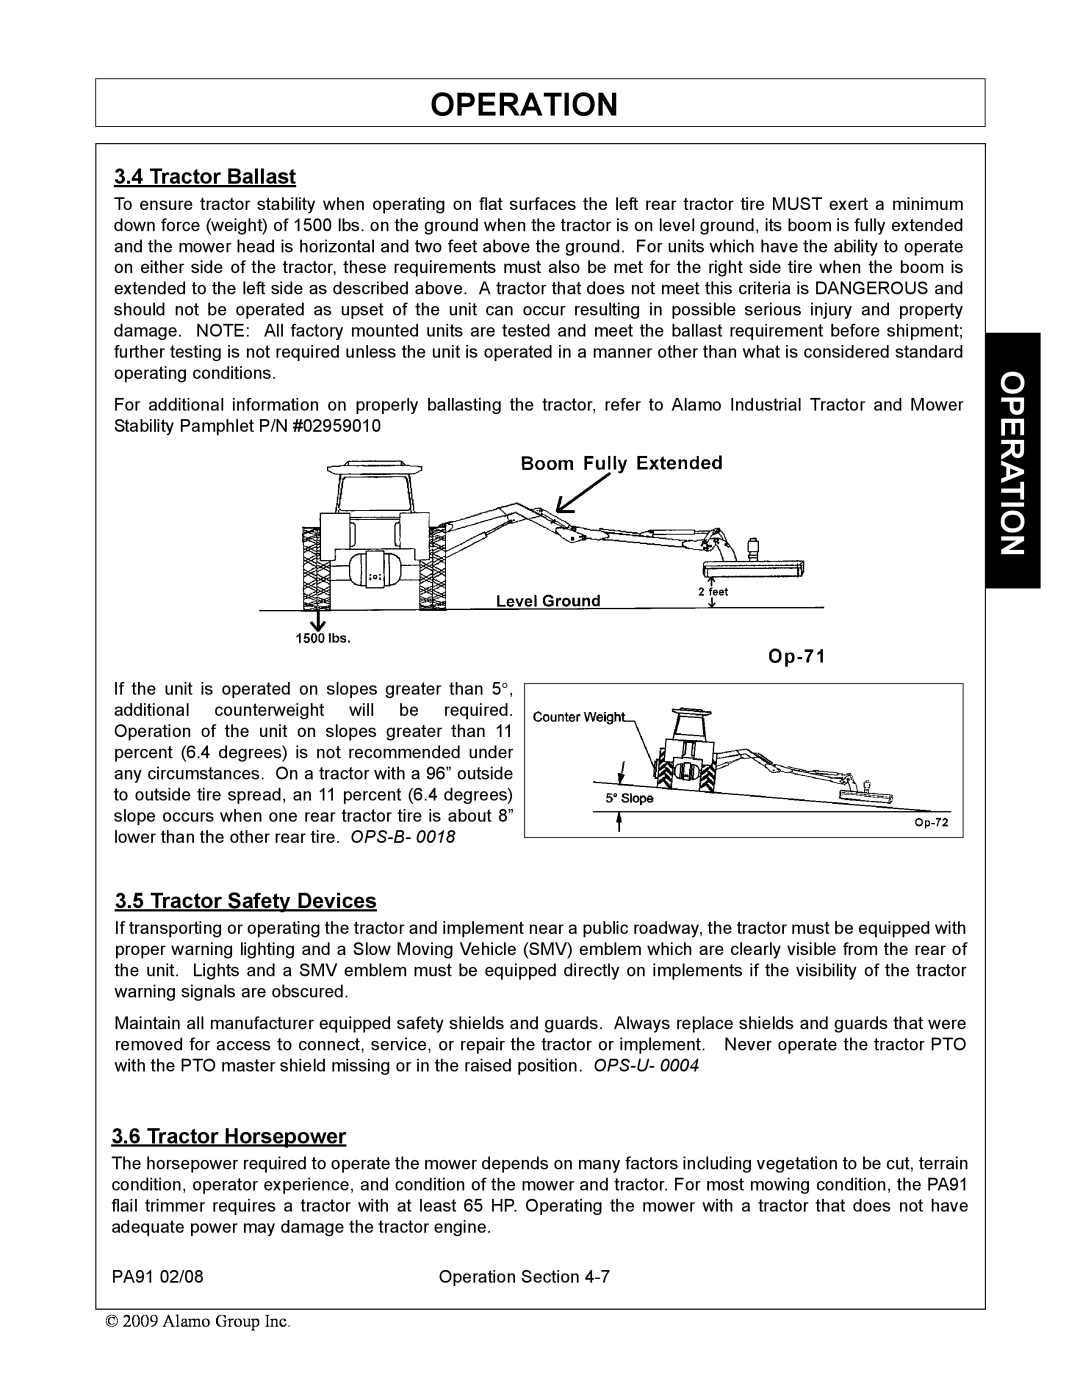 Alamo 7191852C manual Tractor Ballast, Tractor Safety Devices, Tractor Horsepower, Operation 